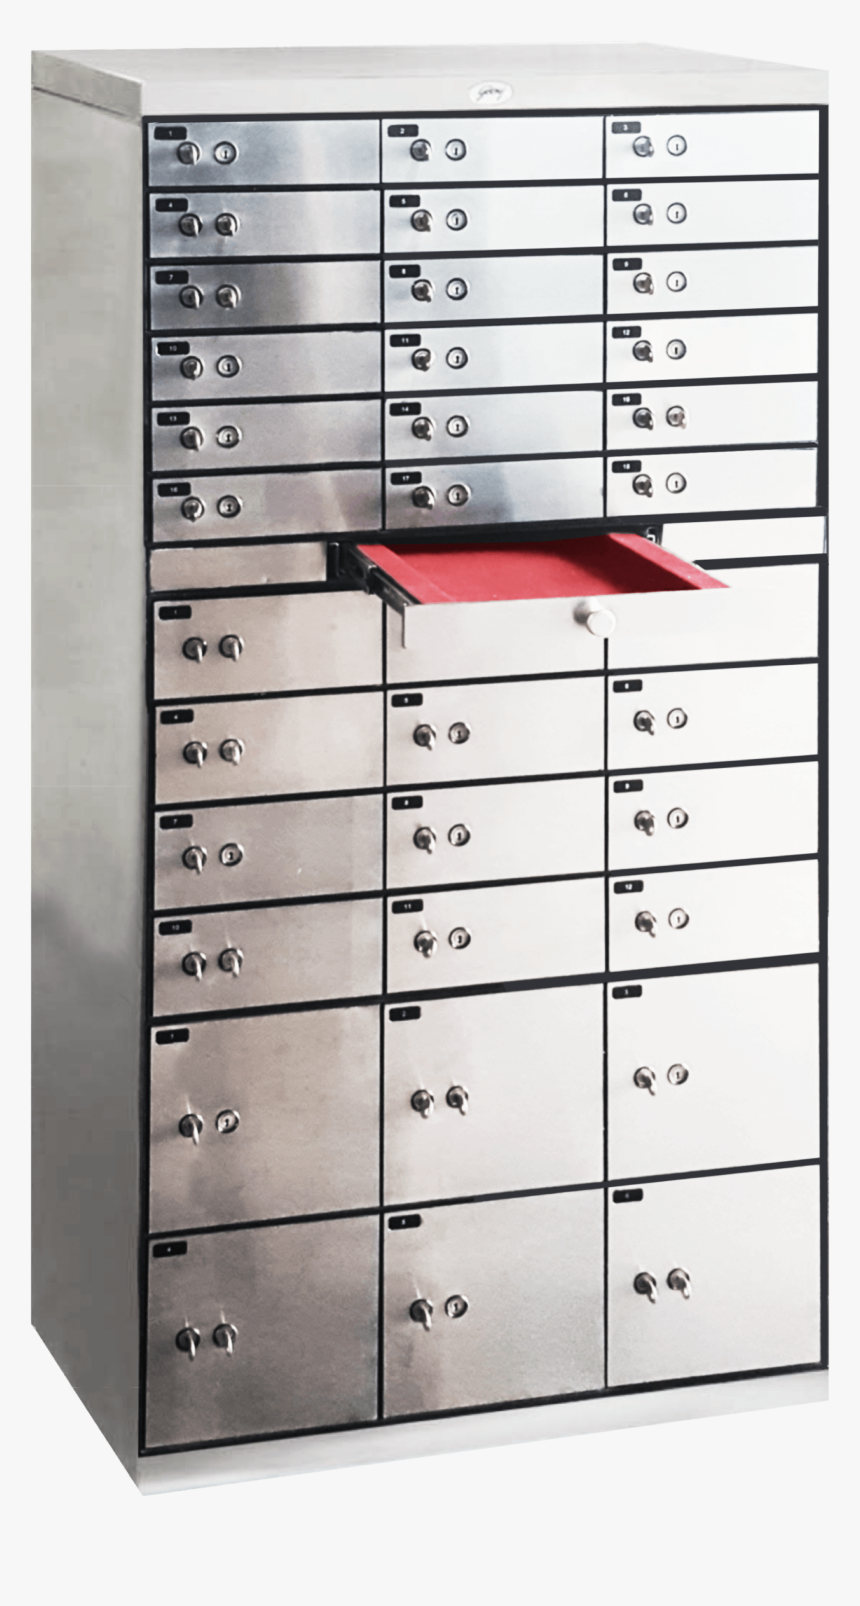 #postbox #mailbox #letterbox #freetoedit - Filing Cabinet, HD Png Download, Free Download